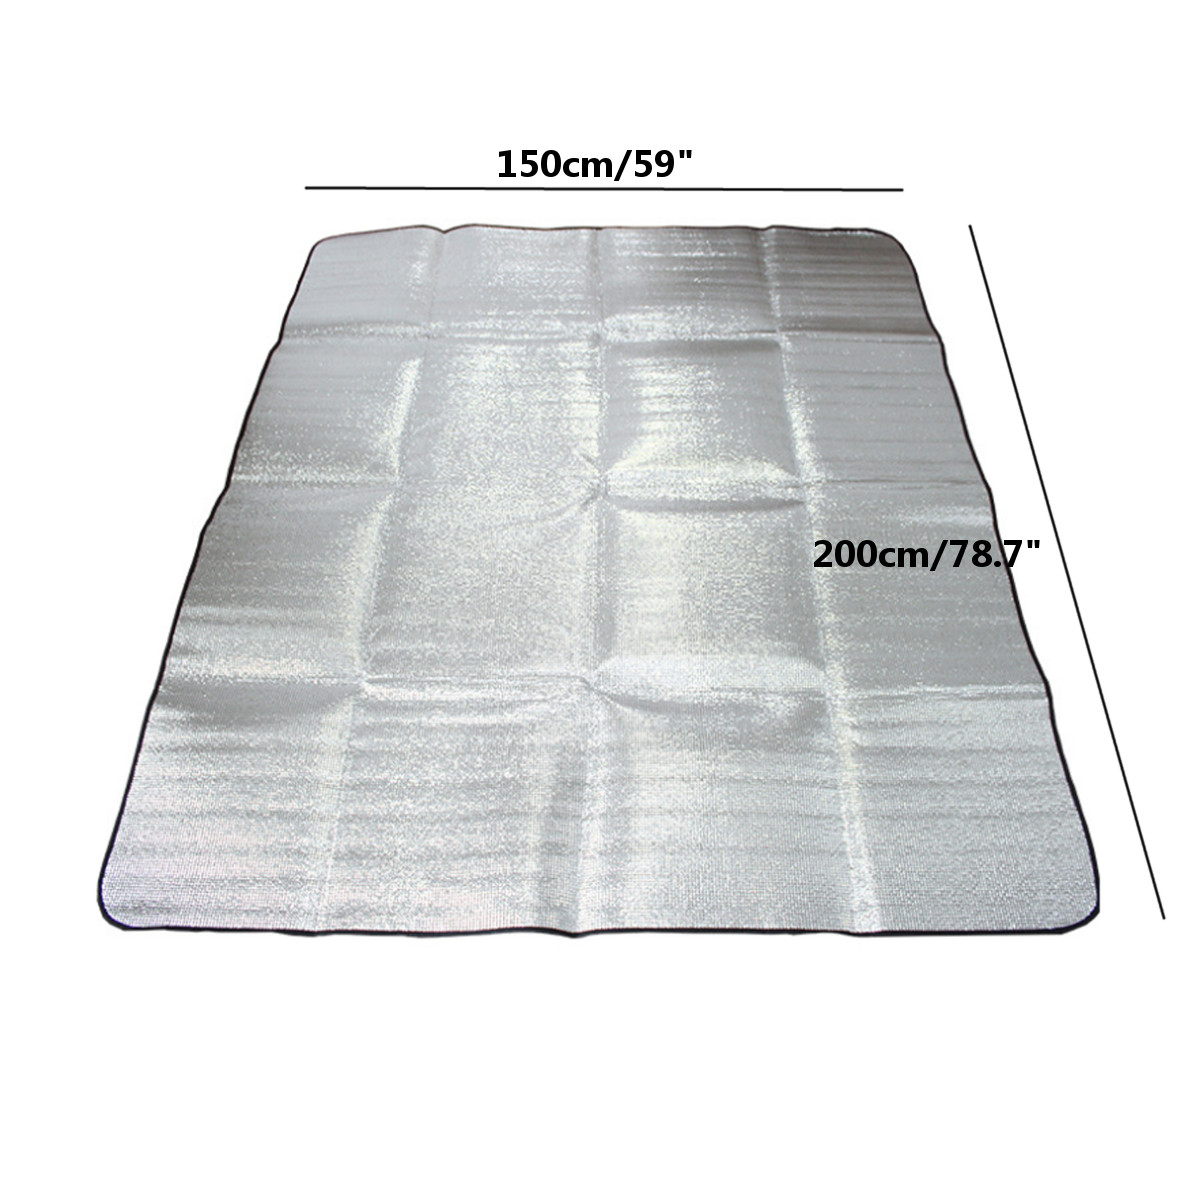 Outdoor-Double-sided-Tent-Mat-Aluminum-Film-Pad-Waterproof-Camping-Picnic-Blanket-1514848-3